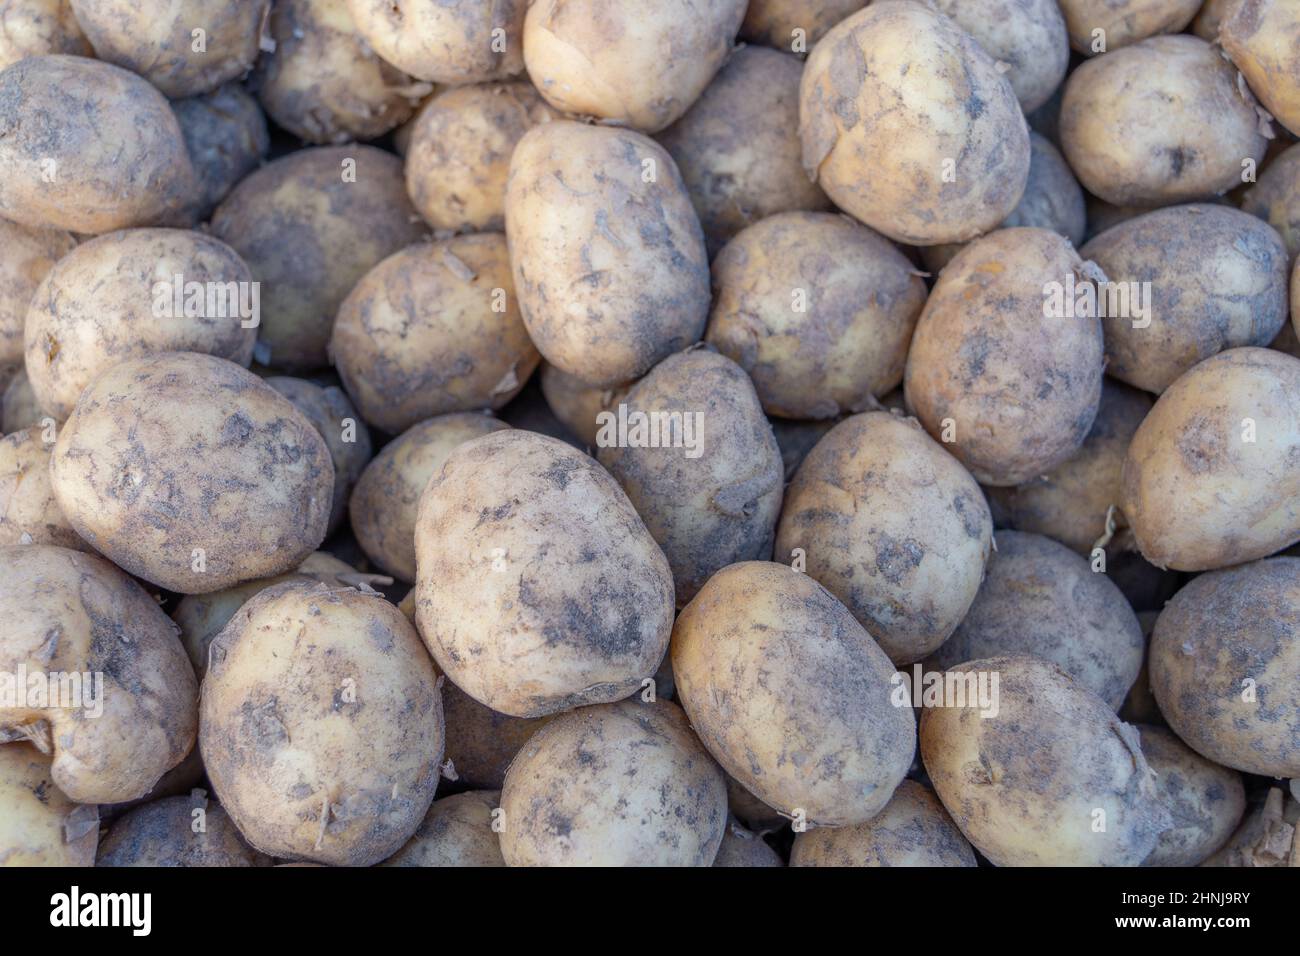 Potatoes, on a market stall in the UK. Stock Photo